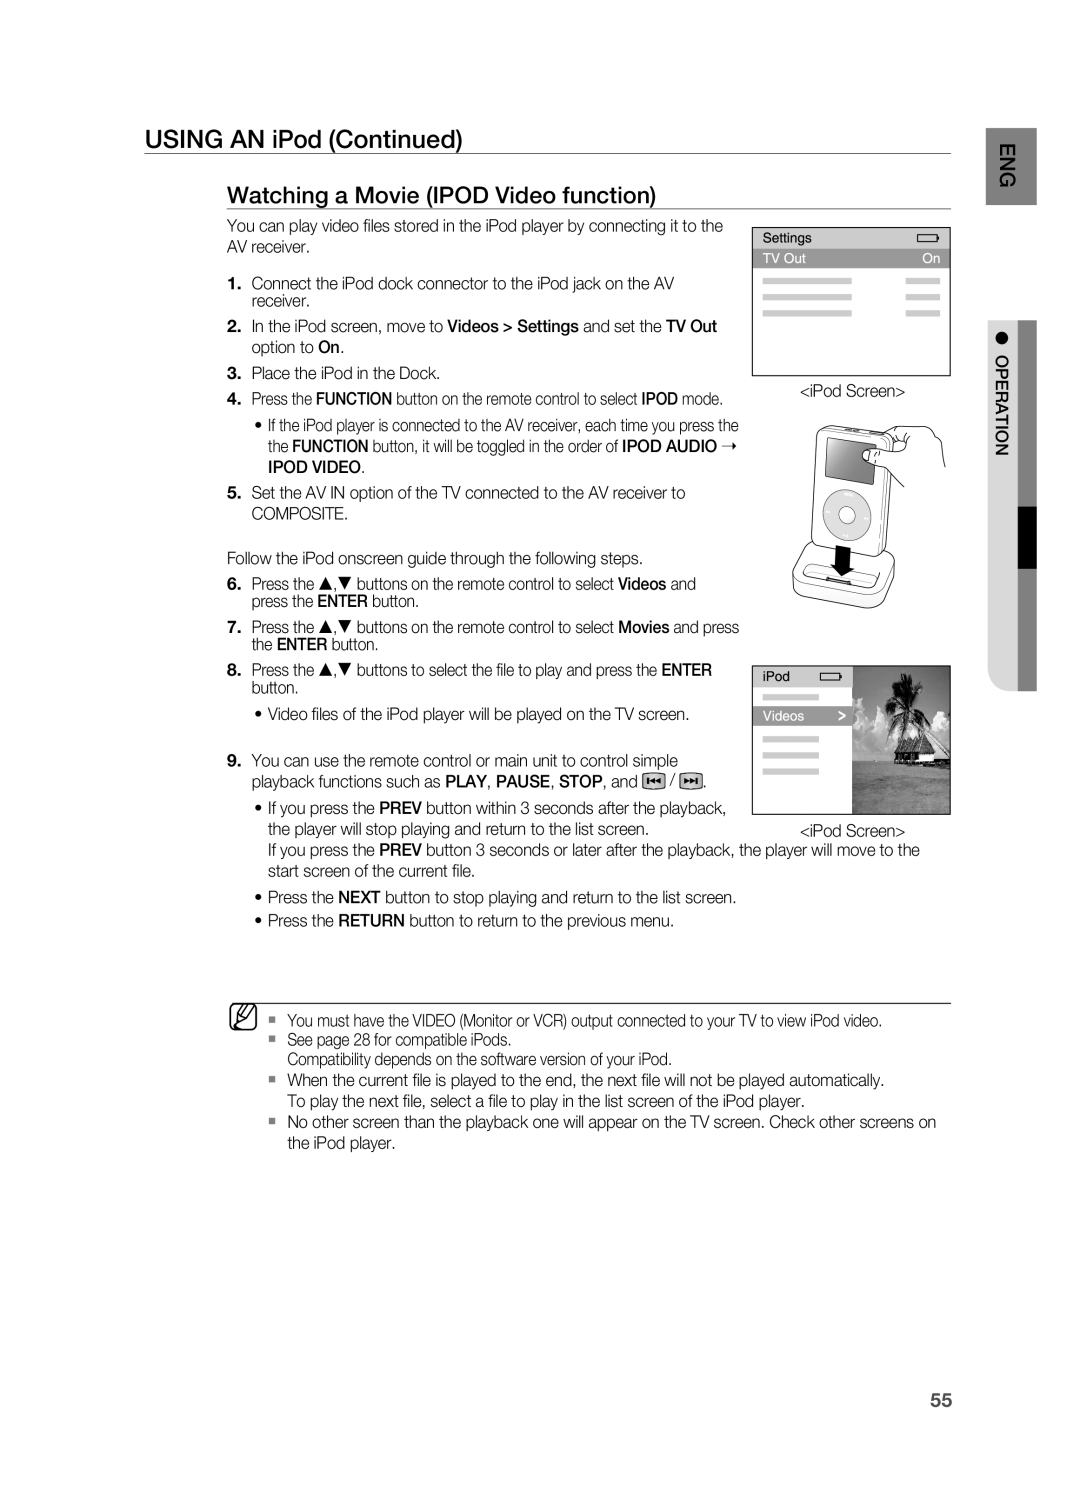 Samsung HT-AS730S user manual Using AN iPod Continued, Watching a Movie IPOD Video function 